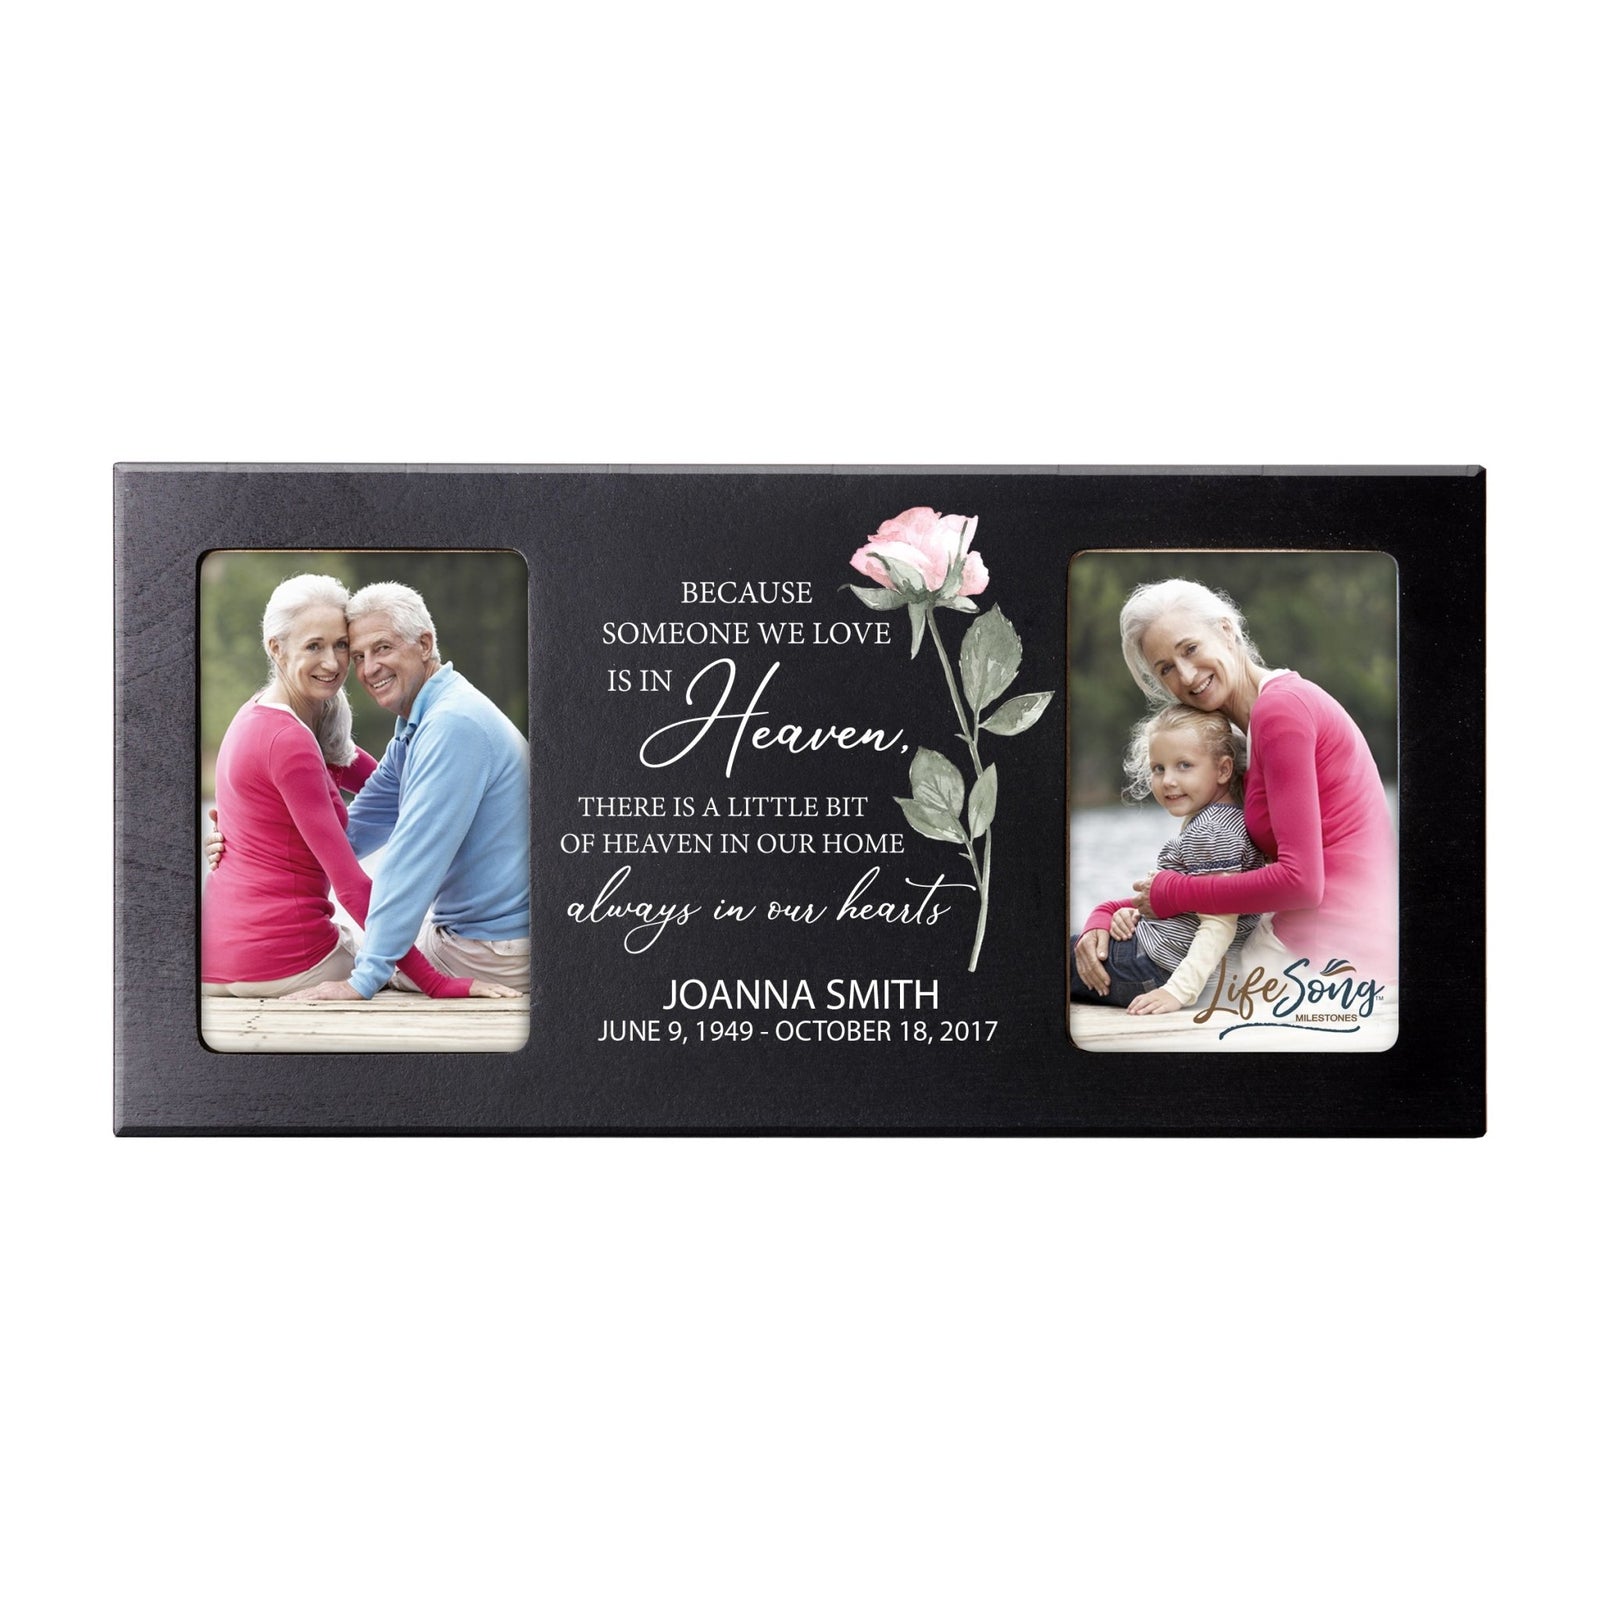 Custom Memorial Picture Frame 16x8in Holds Two 4x6in Photos - There Is A Little Bit Of Heaven - LifeSong Milestones